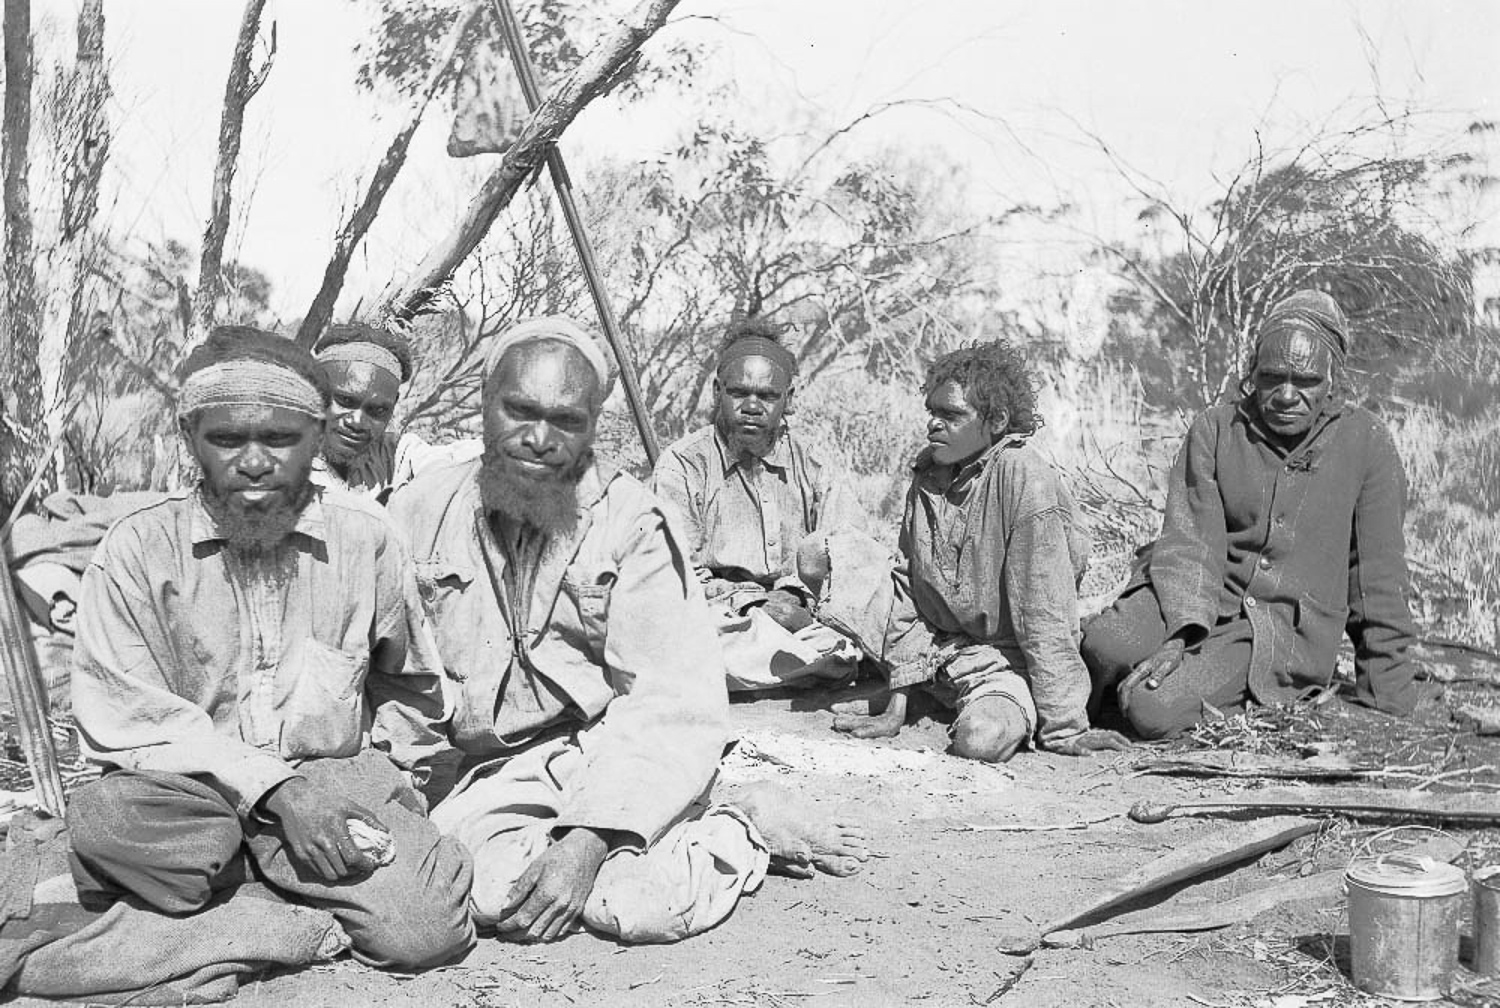 Jack Jamieson, Albert Jamieson, Frank Hogan, Arthur Jamieson and Bill Jamieson with tracker Jimmy Maadi (right) at the ration station, wearing their first set of clothes. Anangu were given western names by the missionaries, as their Indigenous names were deemed too difficult to pronounce. Families were also split up due to a lack of understanding about complex kinship relationships held by Anangu.